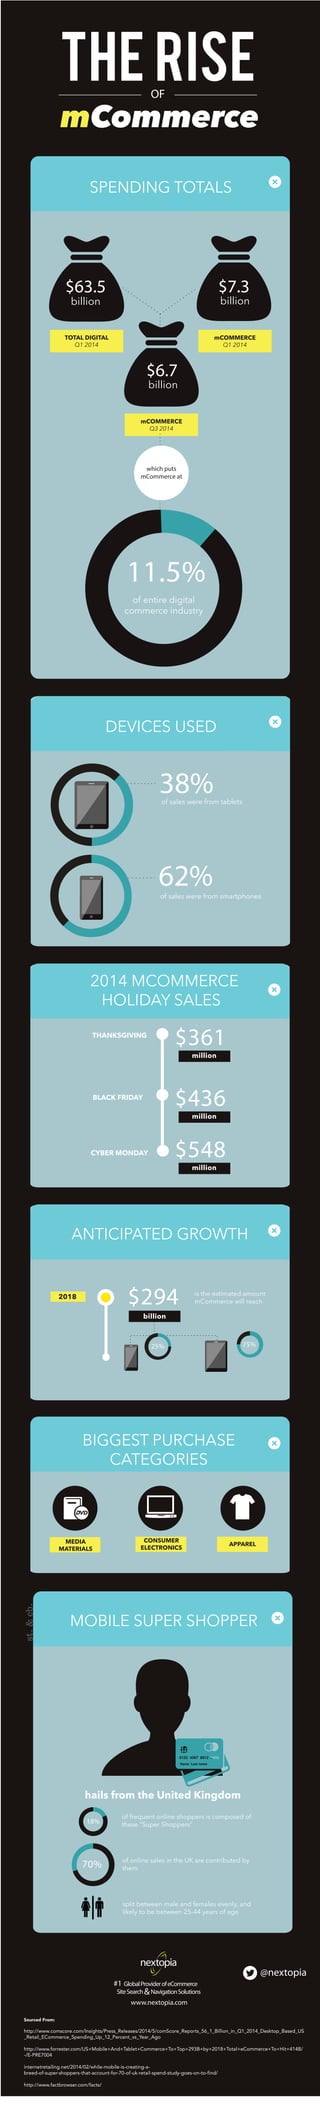 Sourced From:
http://www.comscore.com/Insights/Press_Releases/2014/5/comScore_Reports_56_1_Billion_in_Q1_2014_Desktop_Based_US
_Retail_ECommerce_Spending_Up_12_Percent_vs_Year_Ago
http://www.forrester.com/US+Mobile+And+Tablet+Commerce+To+Top+293B+by+2018+Total+eCommerce+To+Hit+414B/
-/E-PRE7004
internetretailing.net/2014/02/while-mobile-is-creating-a-
breed-of-super-shoppers-that-account-for-70-of-uk-retail-spend-study-goes-on-to-find/
http://www.factbrowser.com/facts/
www.nextopia.com
#1 GlobalProviderofeCommerce
SiteSearch
@nextopia
&NavigationSolutions
11.5%
of entire digital
commerce industry
$63.5
TOTAL DIGITAL
Q1 2014
mCOMMERCE
Q1 2014
mCOMMERCE
Q3 2014
which puts
mCommerce at
$63.5
billion
$7.3
billion
$6.7
billion
SPENDING TOTALS
DEVICES USED
38%of sales were from tablets
62%of sales were from smartphones
ANTICIPATED GROWTH
$294 is the estimated amount
mCommerce will reach
billion
2018
25% 75%
st.&eb.
MOBILE SUPER SHOPPER
18%
of frequent online shoppers is composed of
these “Super Shoppers”
hails from the United Kingdom
70% of online sales in the UK are contributed by
them
split between male and females evenly, and
likely to be between 25-44 years of age
THE RISEOF
mCommerce
2014 MCOMMERCE
HOLIDAY SALES
million
million
$361
$436
million
$548
THANKSGIVING
BLACK FRIDAY
CYBER MONDAY
MEDIA
MATERIALS
CONSUMER
ELECTRONICS
APPAREL
BIGGEST PURCHASE
CATEGORIES
 